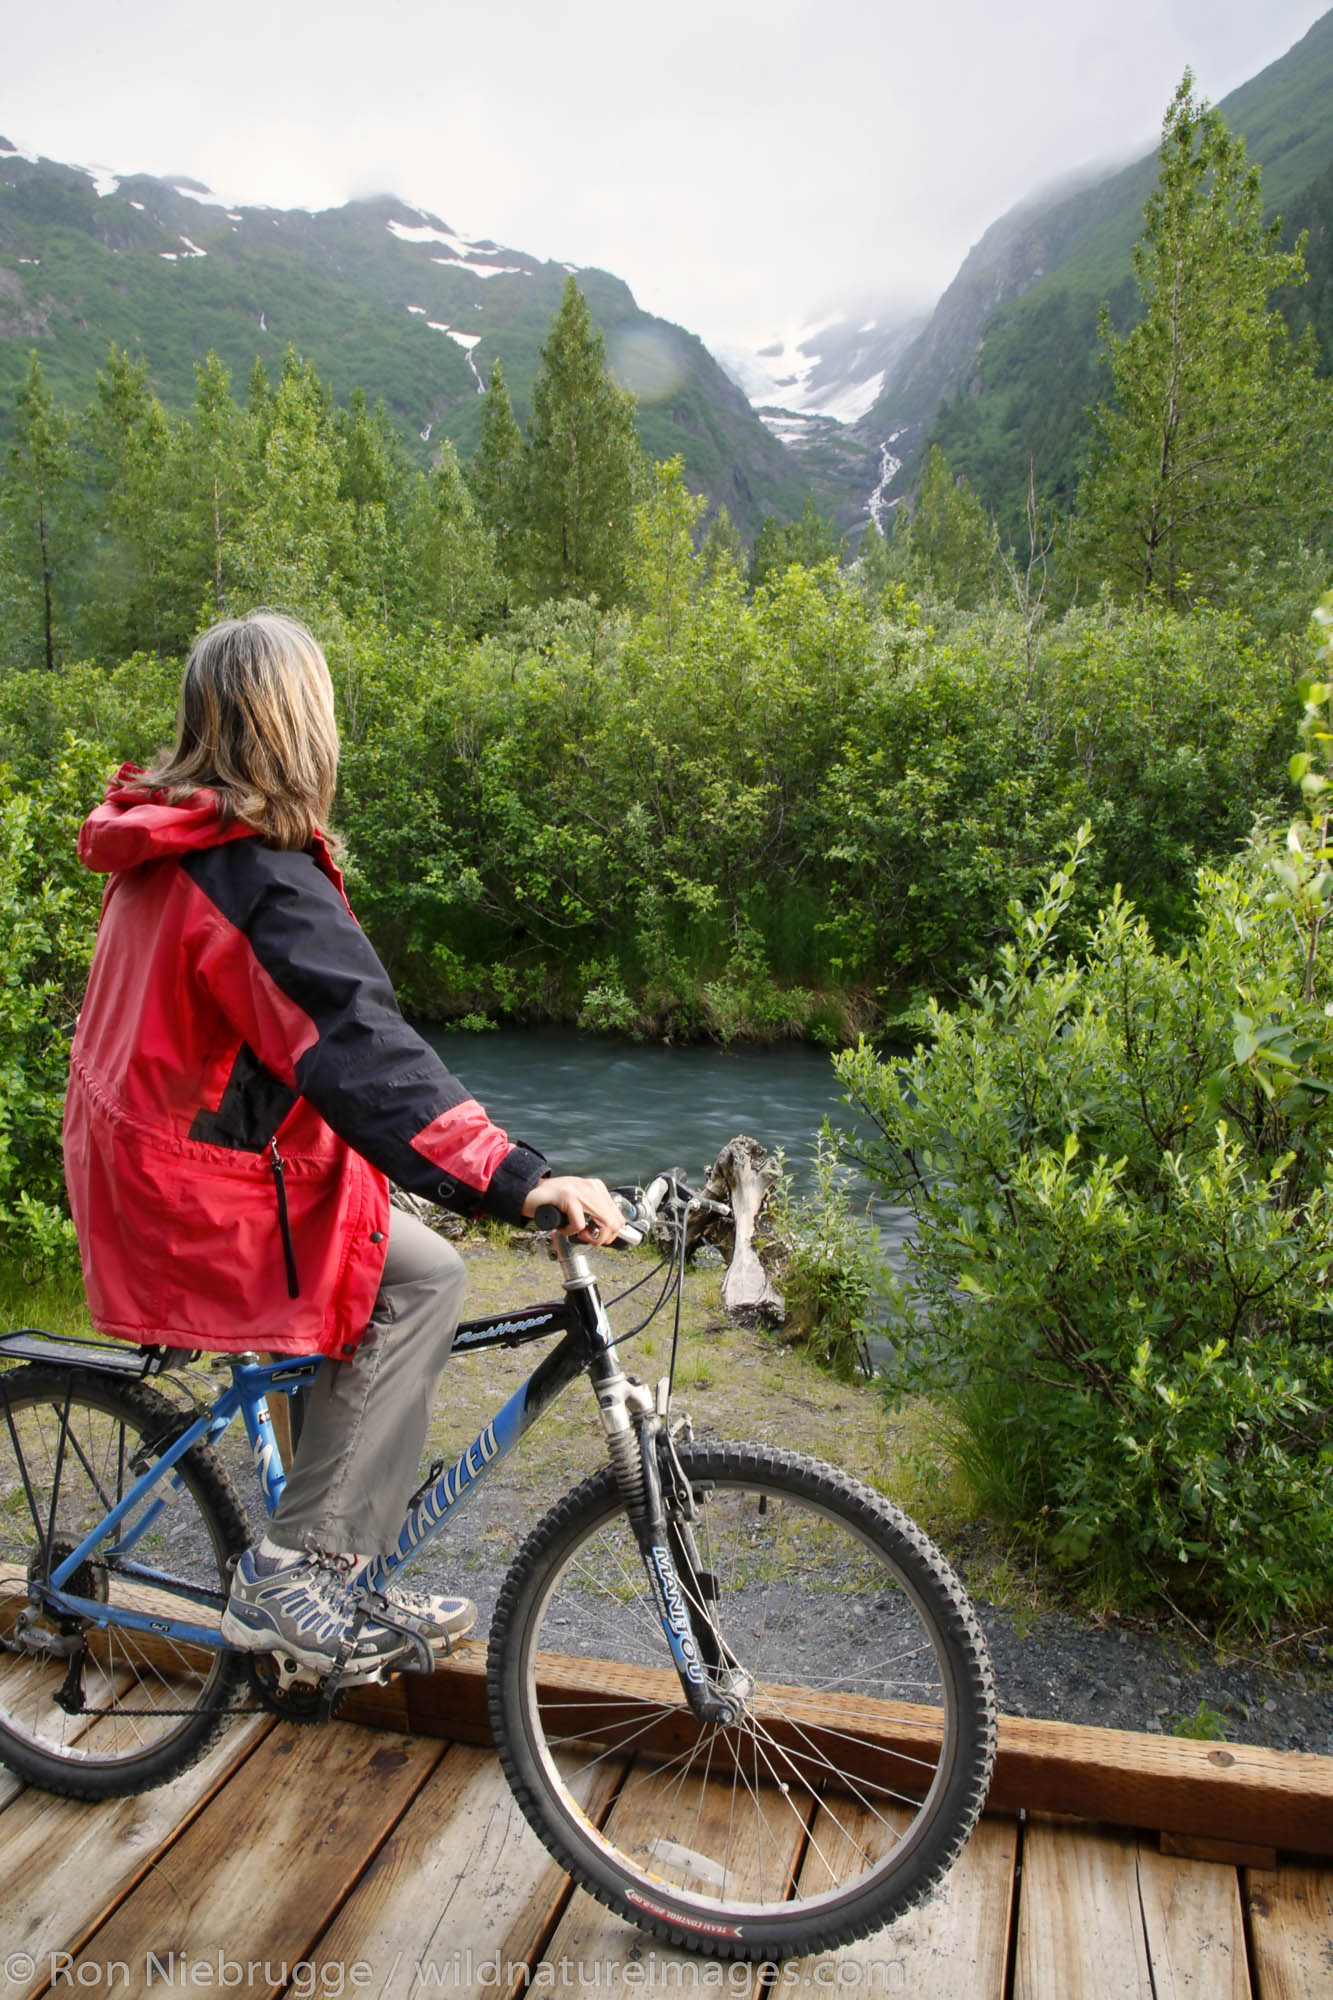 Bike riding on the Trail of Blue Ice, Portage Valley, Chugach National Forest, Alaska. (MR)